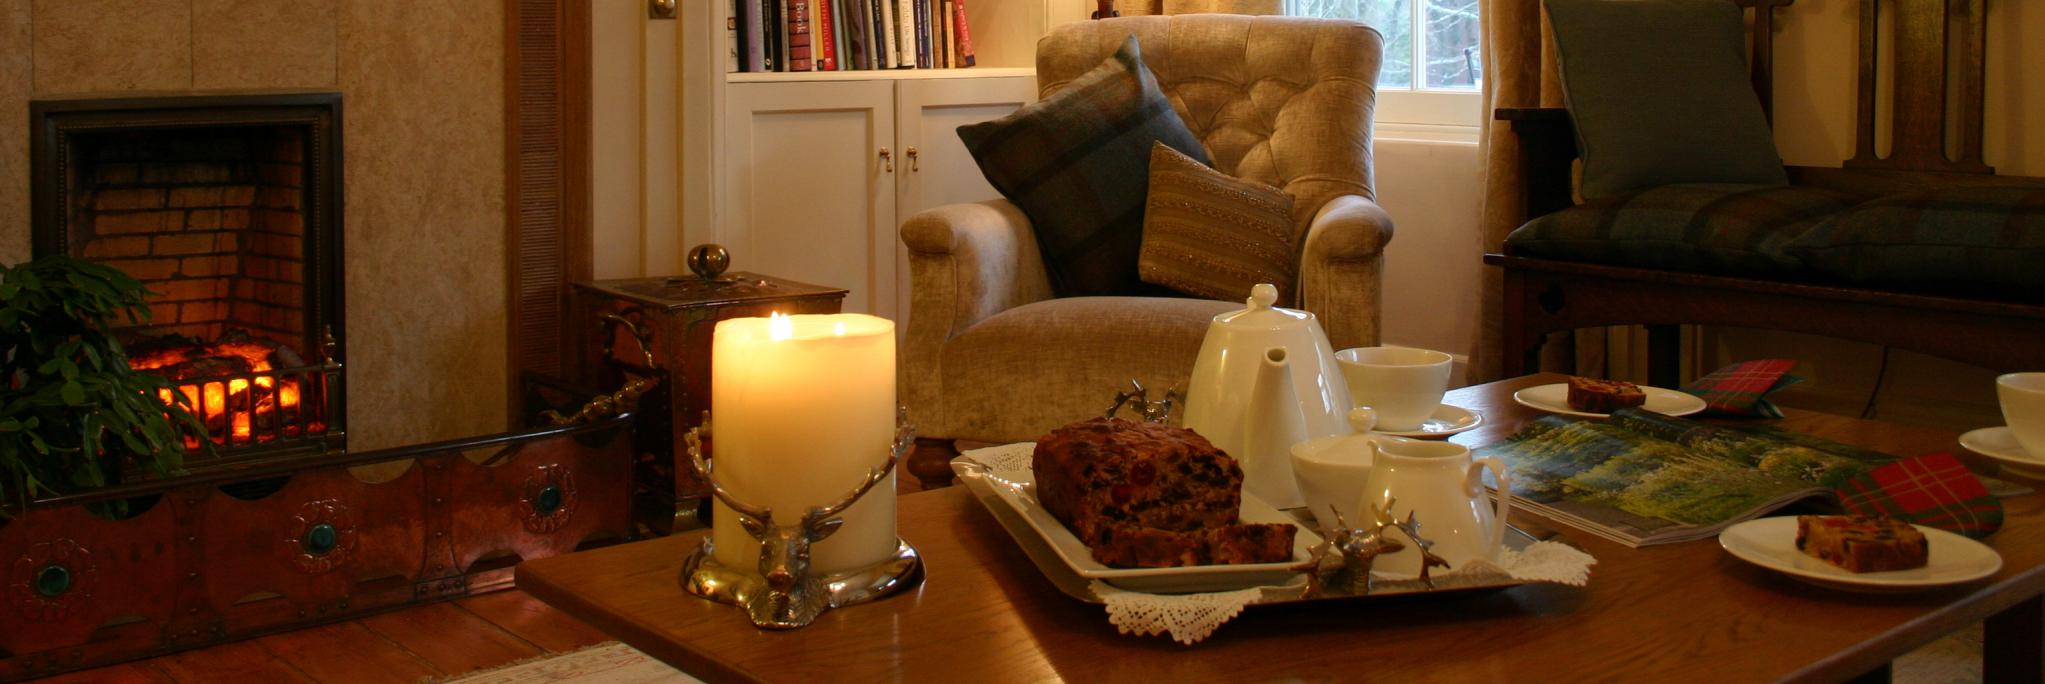 Cake by the fireside at The Dulaig, Grantown-on-Spey